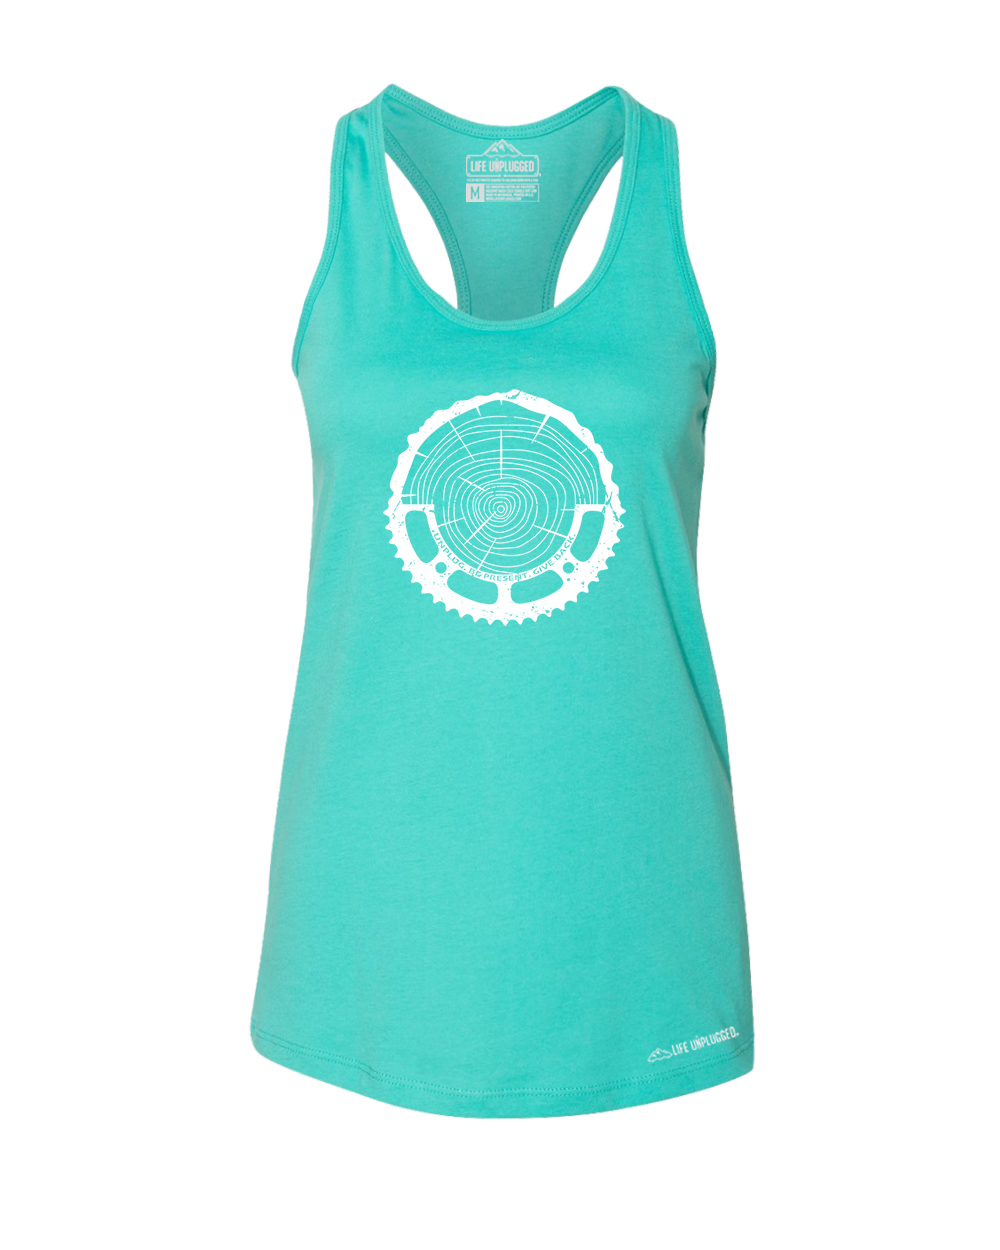 Tree Rings Chainring Premium Women's Relaxed Fit Racerback Tank Top - Life Unplugged